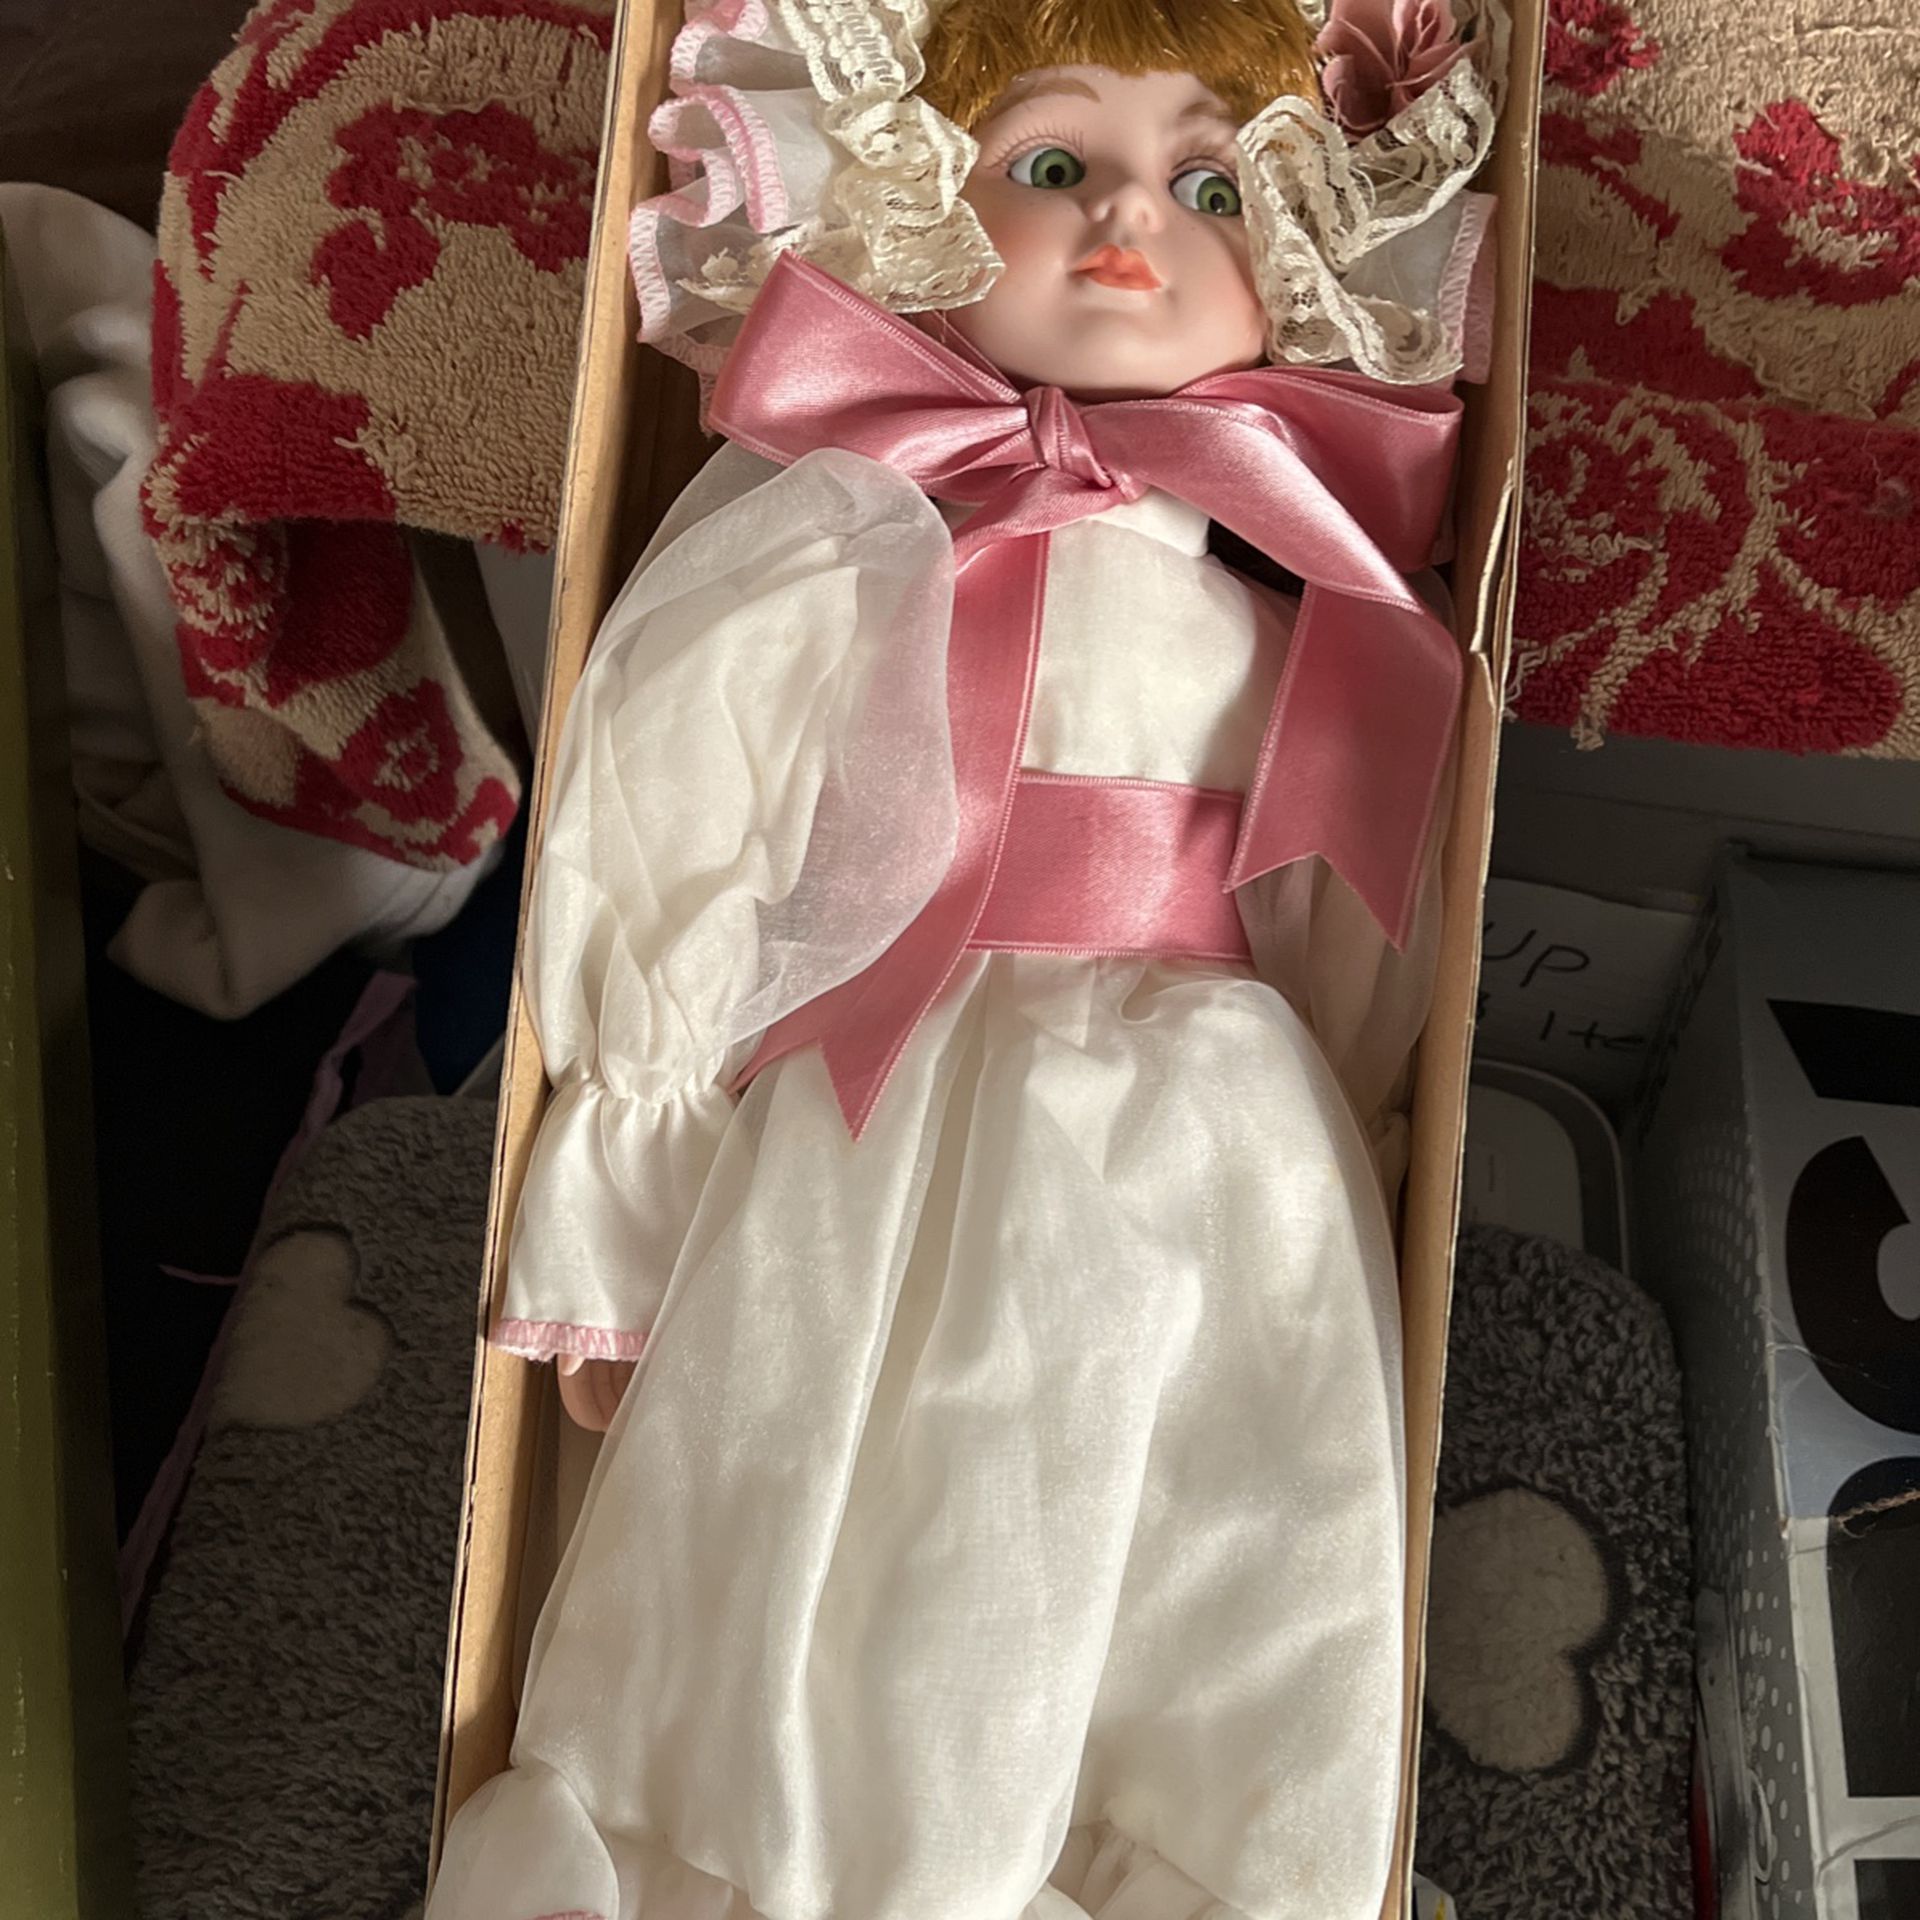 Collection Porcelain Doll $12